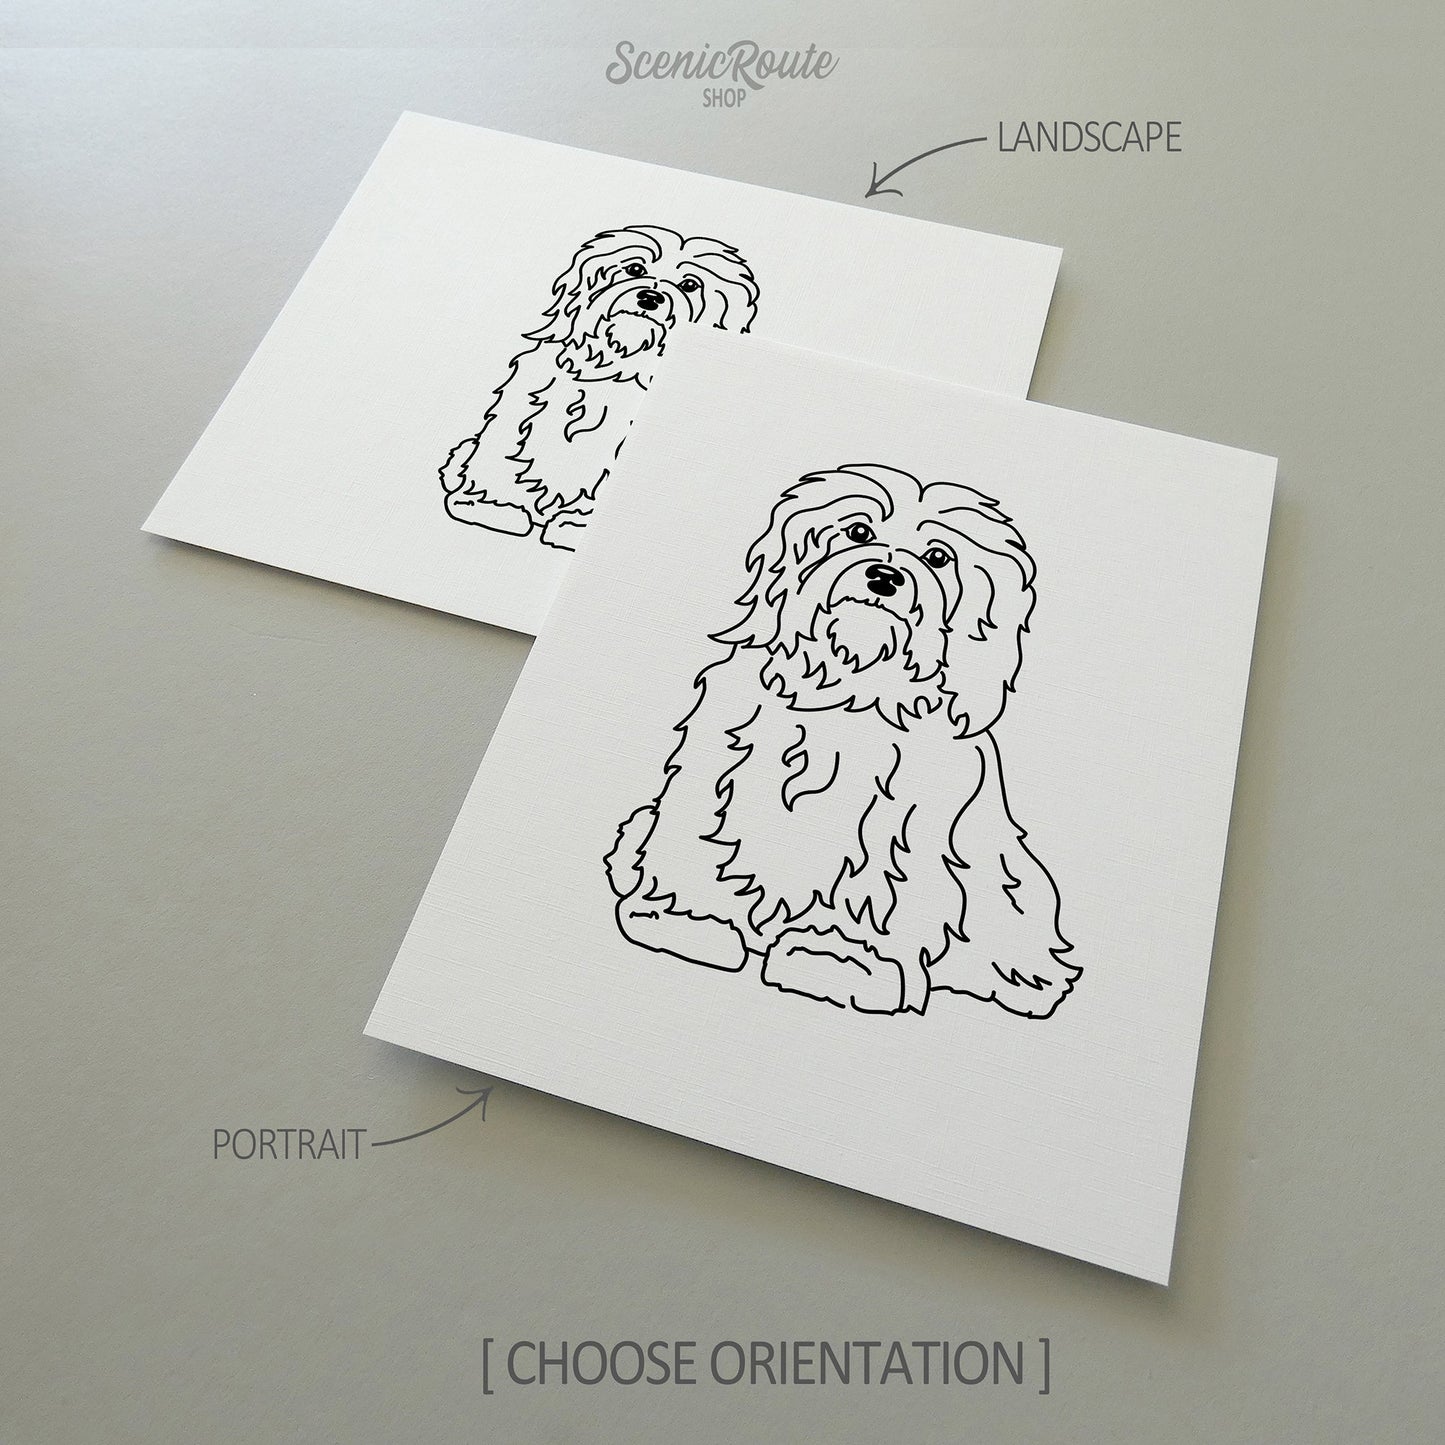 Two line art drawings of a Havanese dog on white linen paper with a gray background.  The pieces are shown in portrait and landscape orientation for the available art print options.